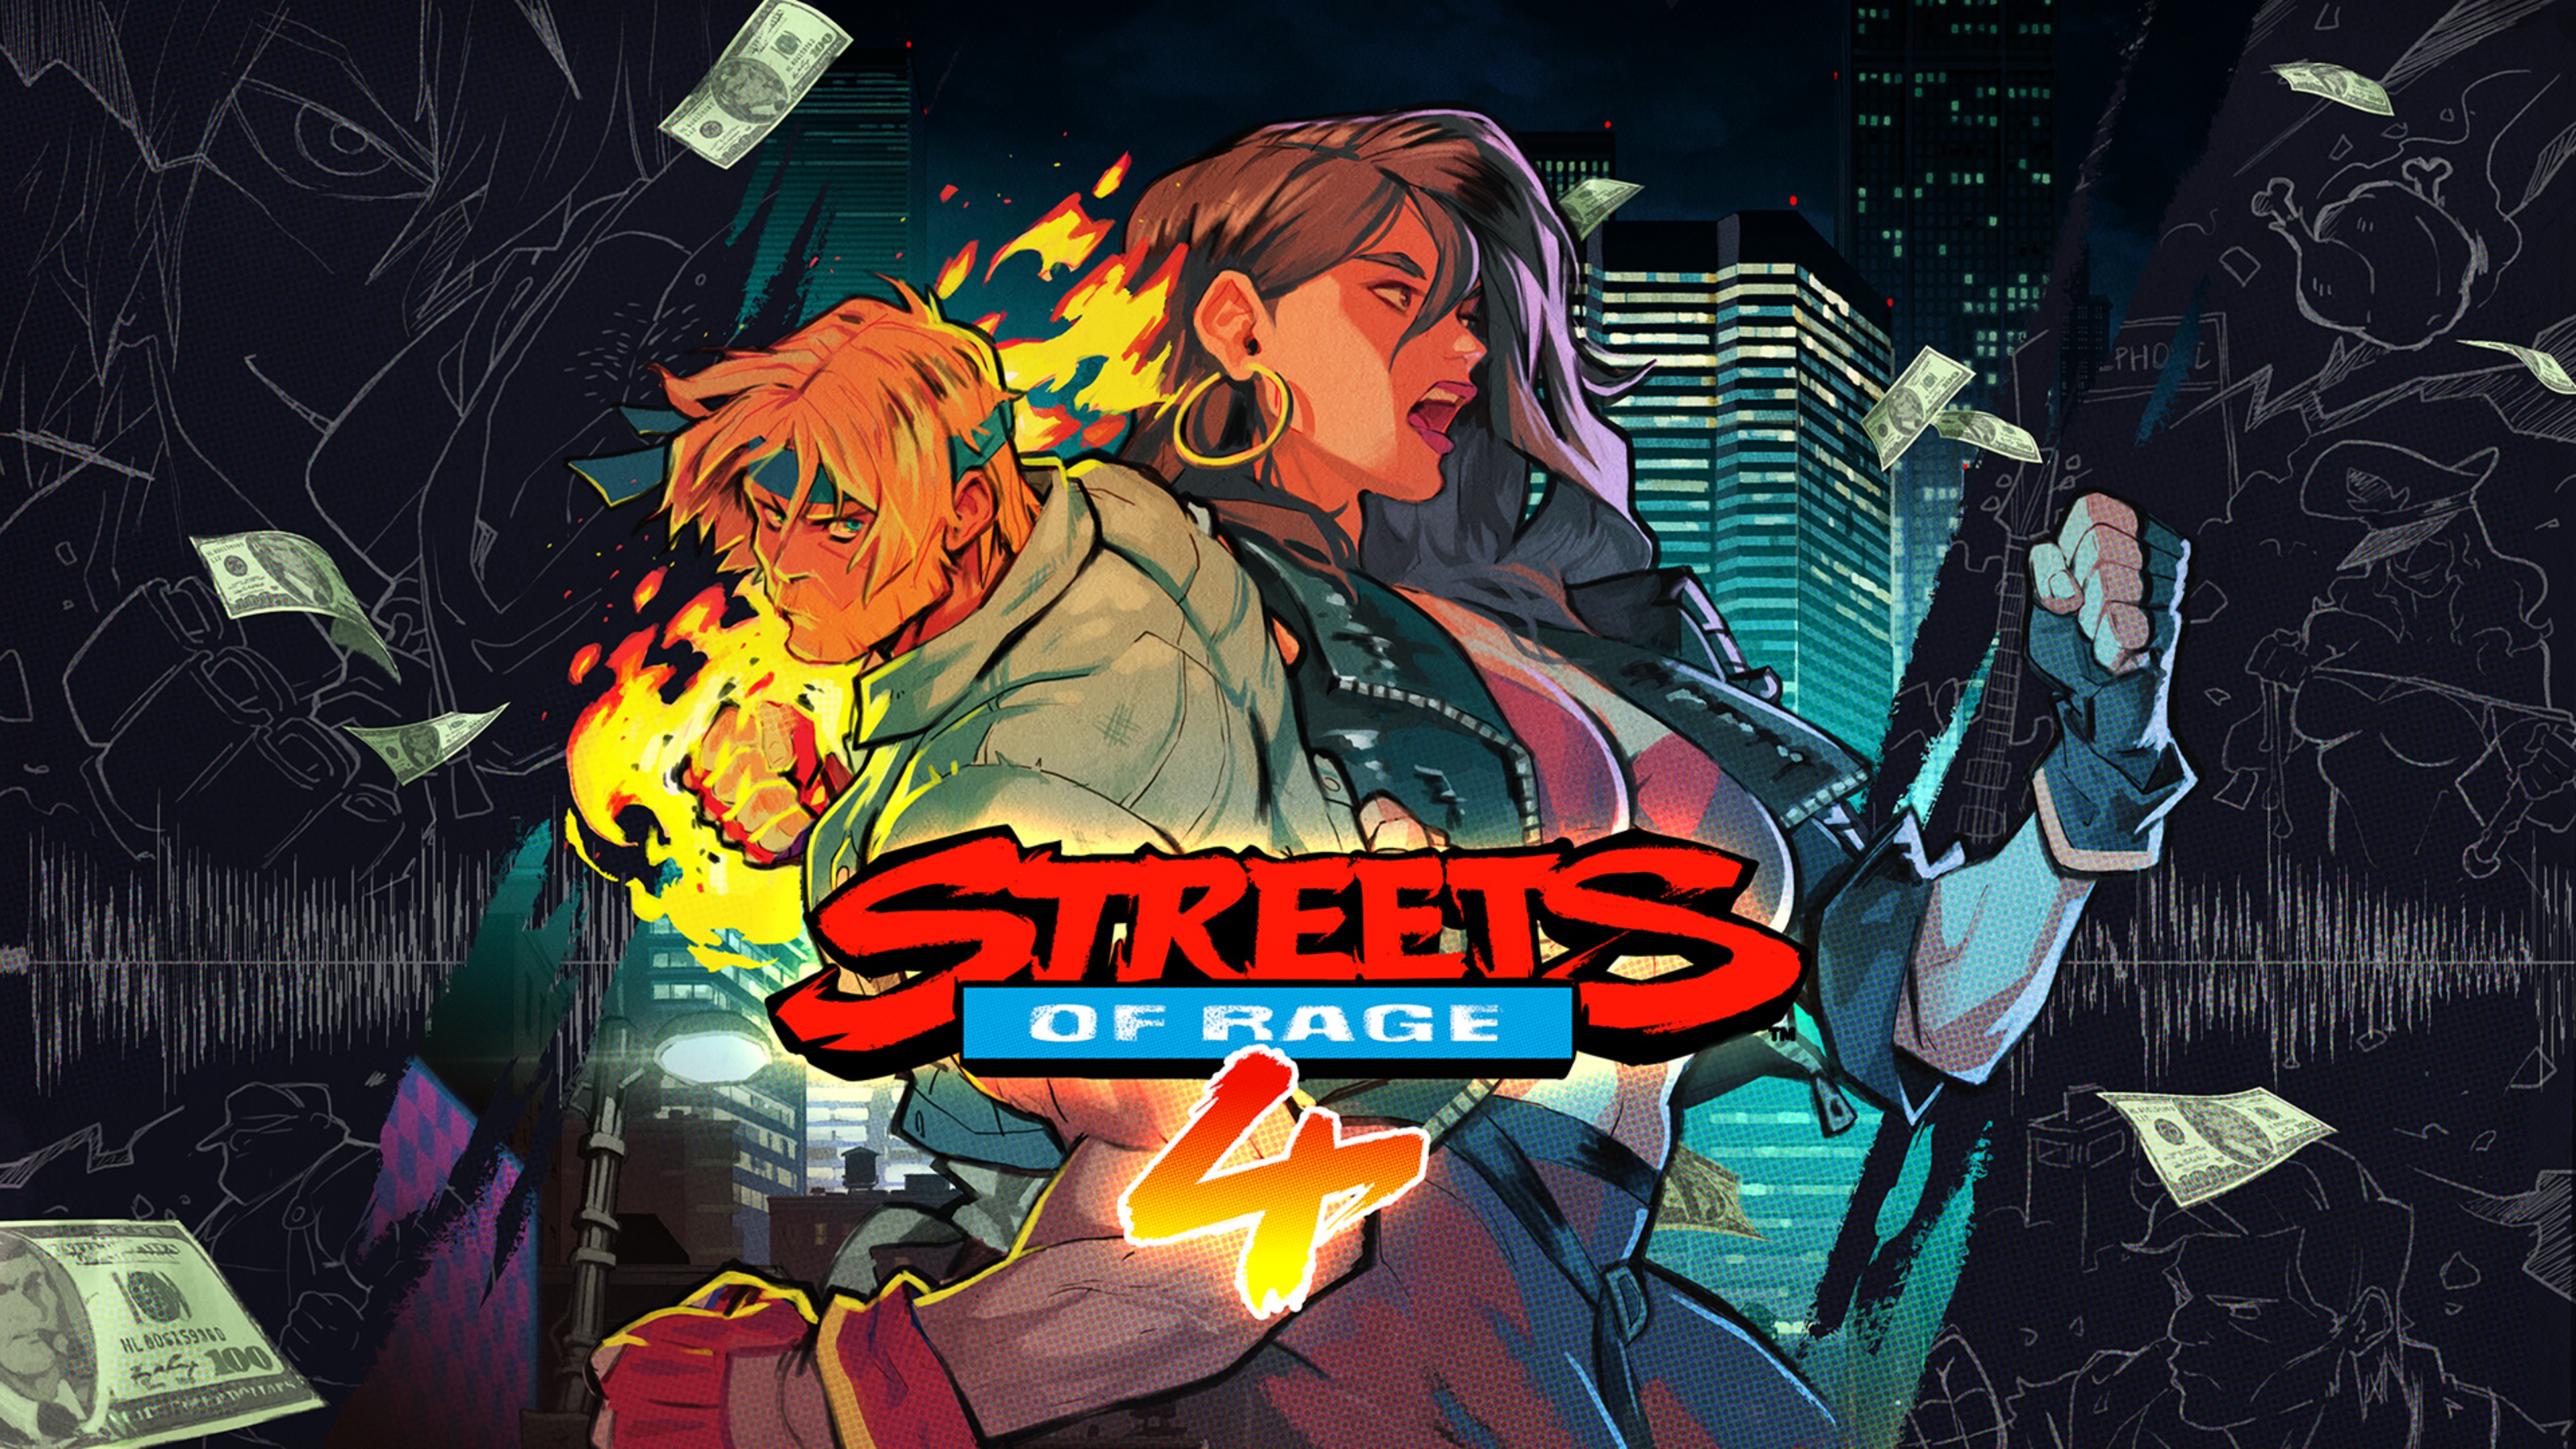 streets of rage 4 - Of Rage